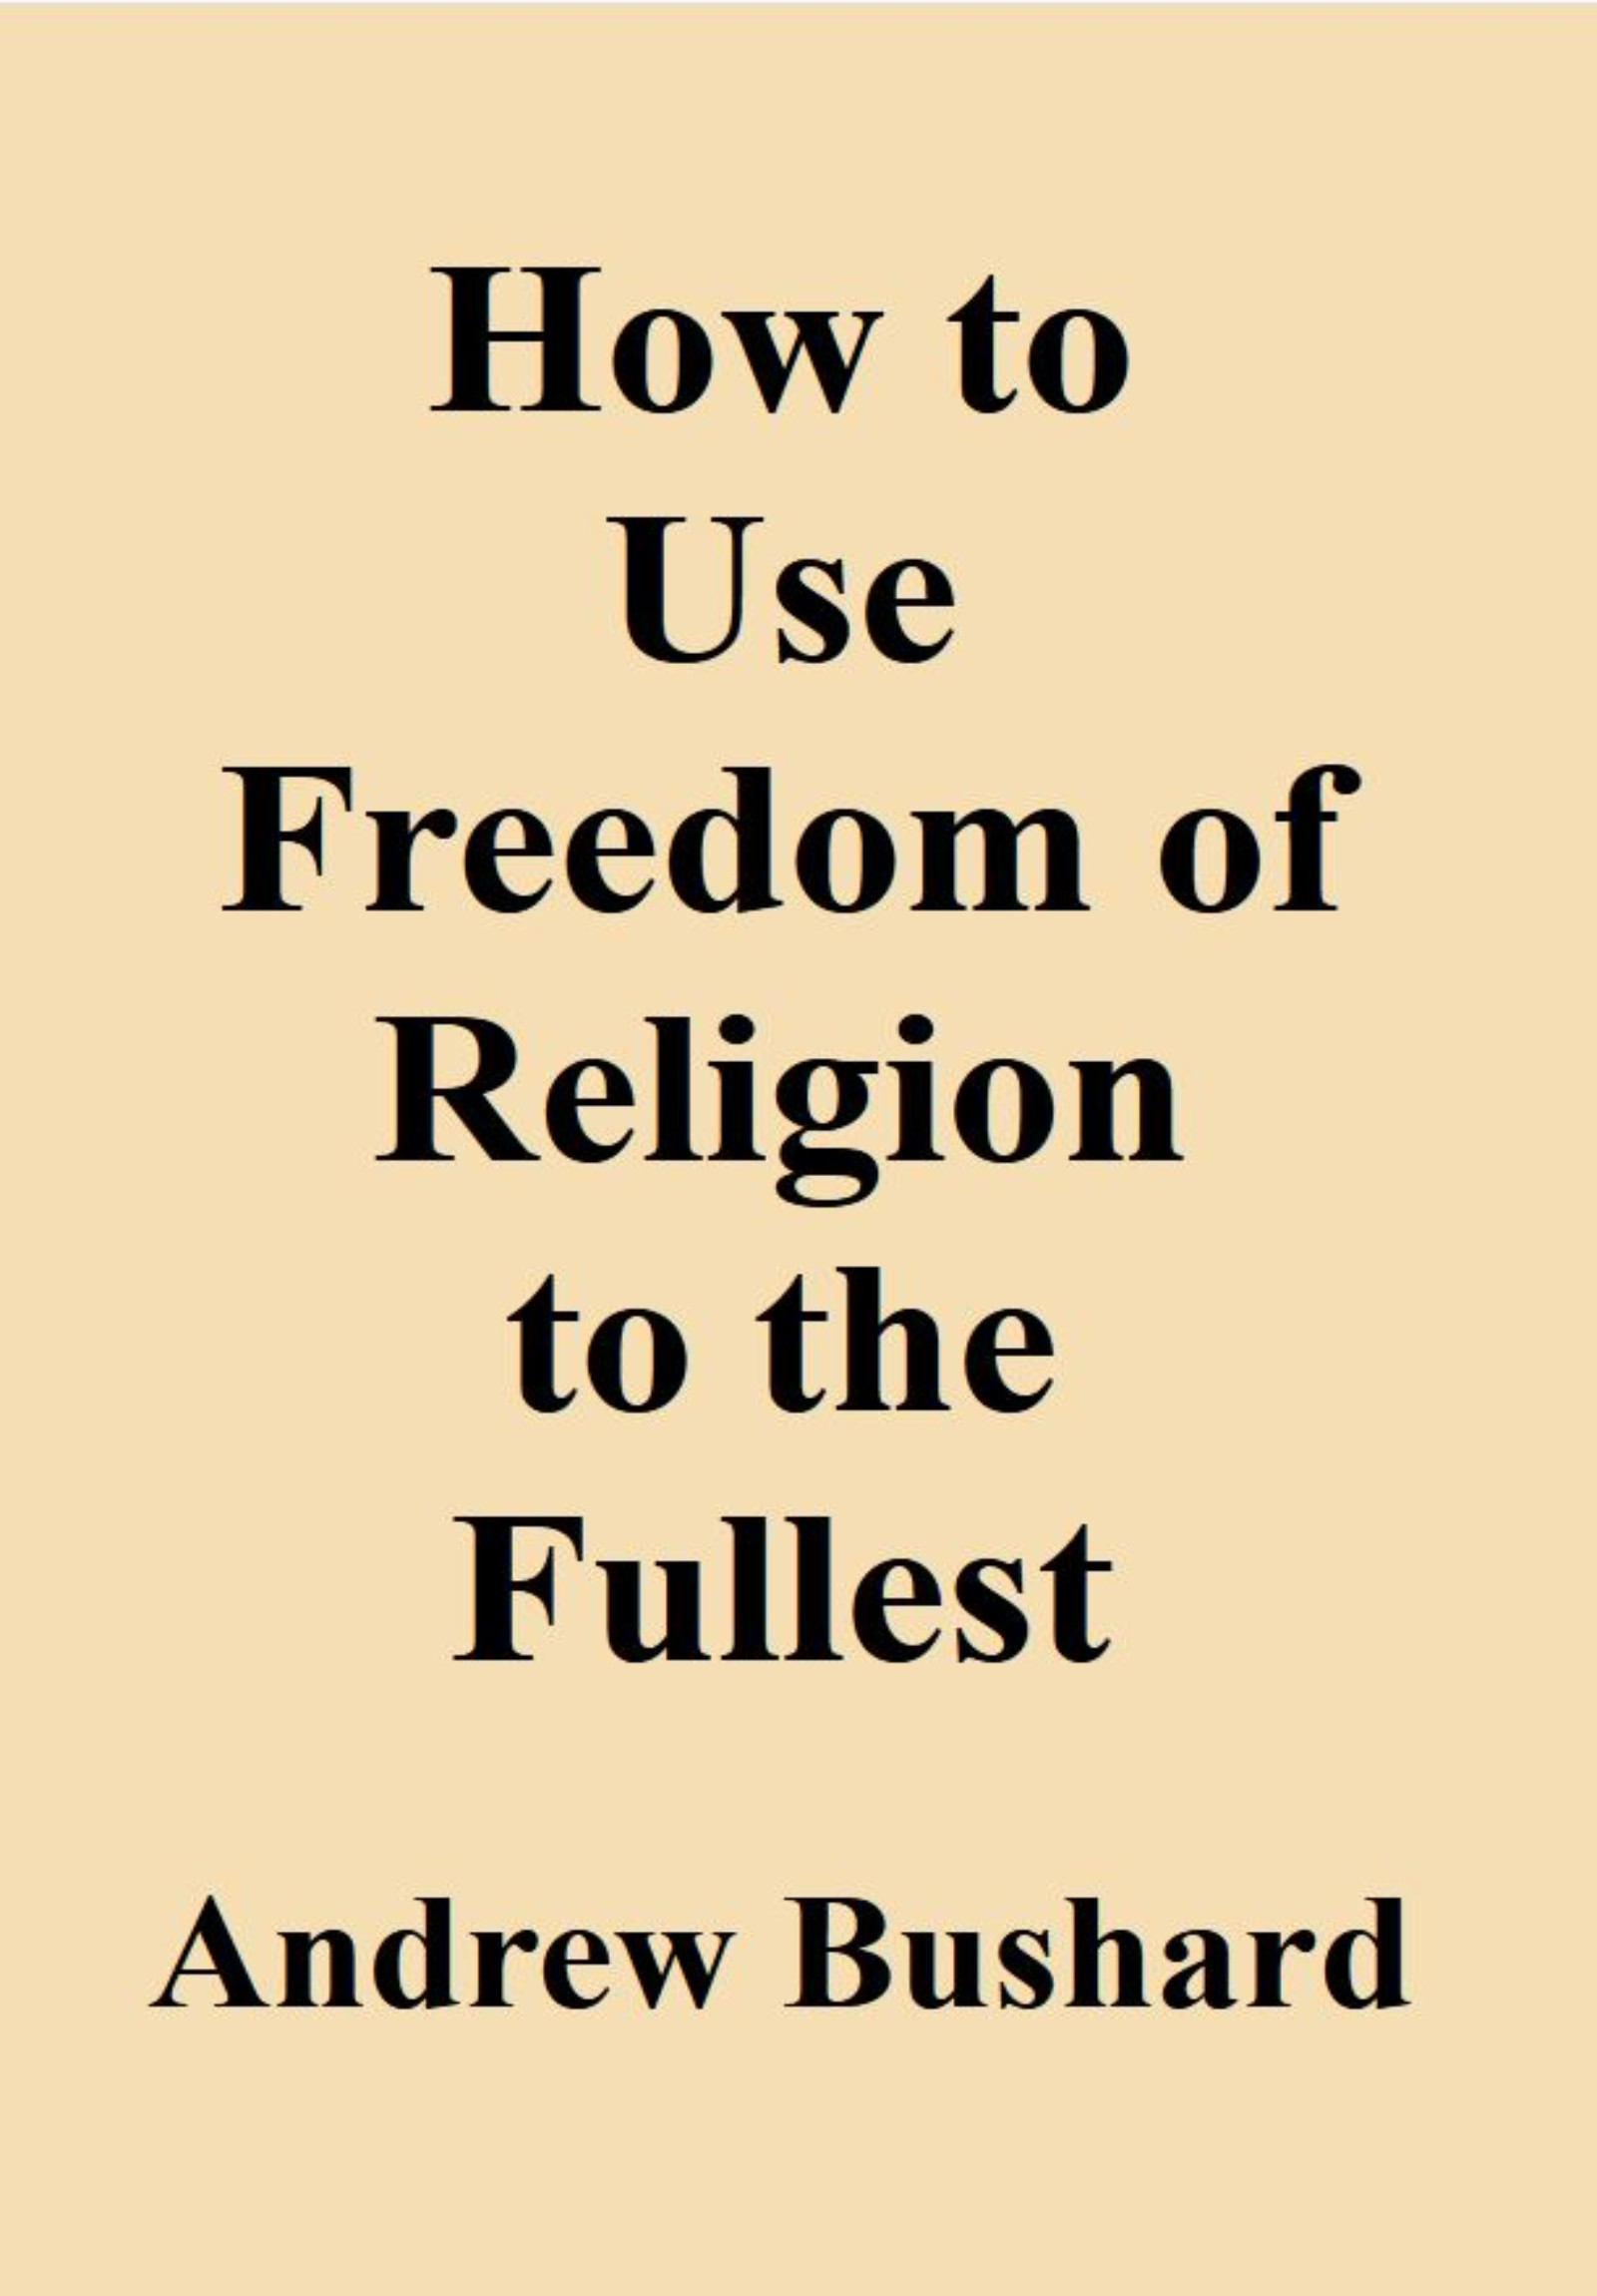 How to Use Freedom of Religion to the Fullest's featured image